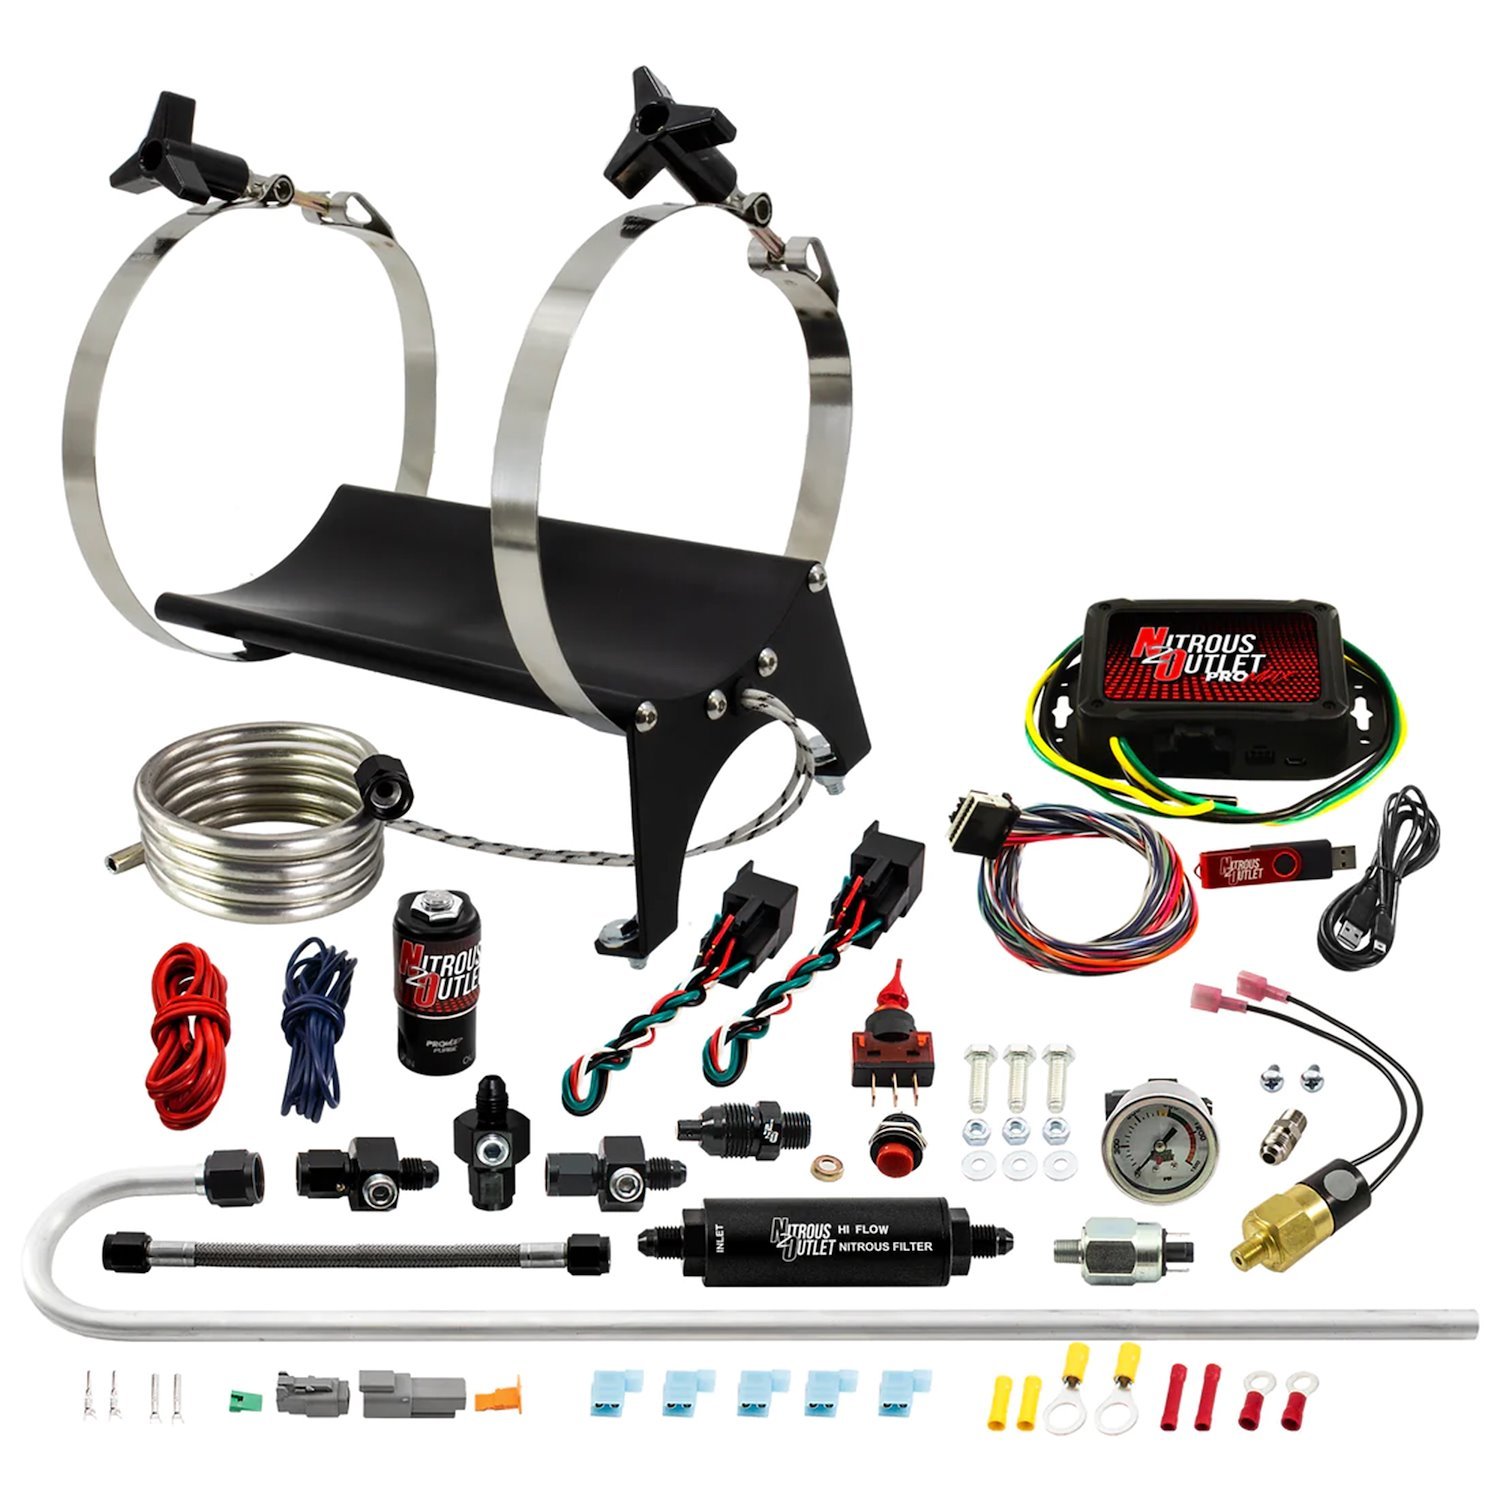 00-69003-L6 Ultimate Nitrous Accessory Package, ProMax, Low Fuel Pressure/6AN